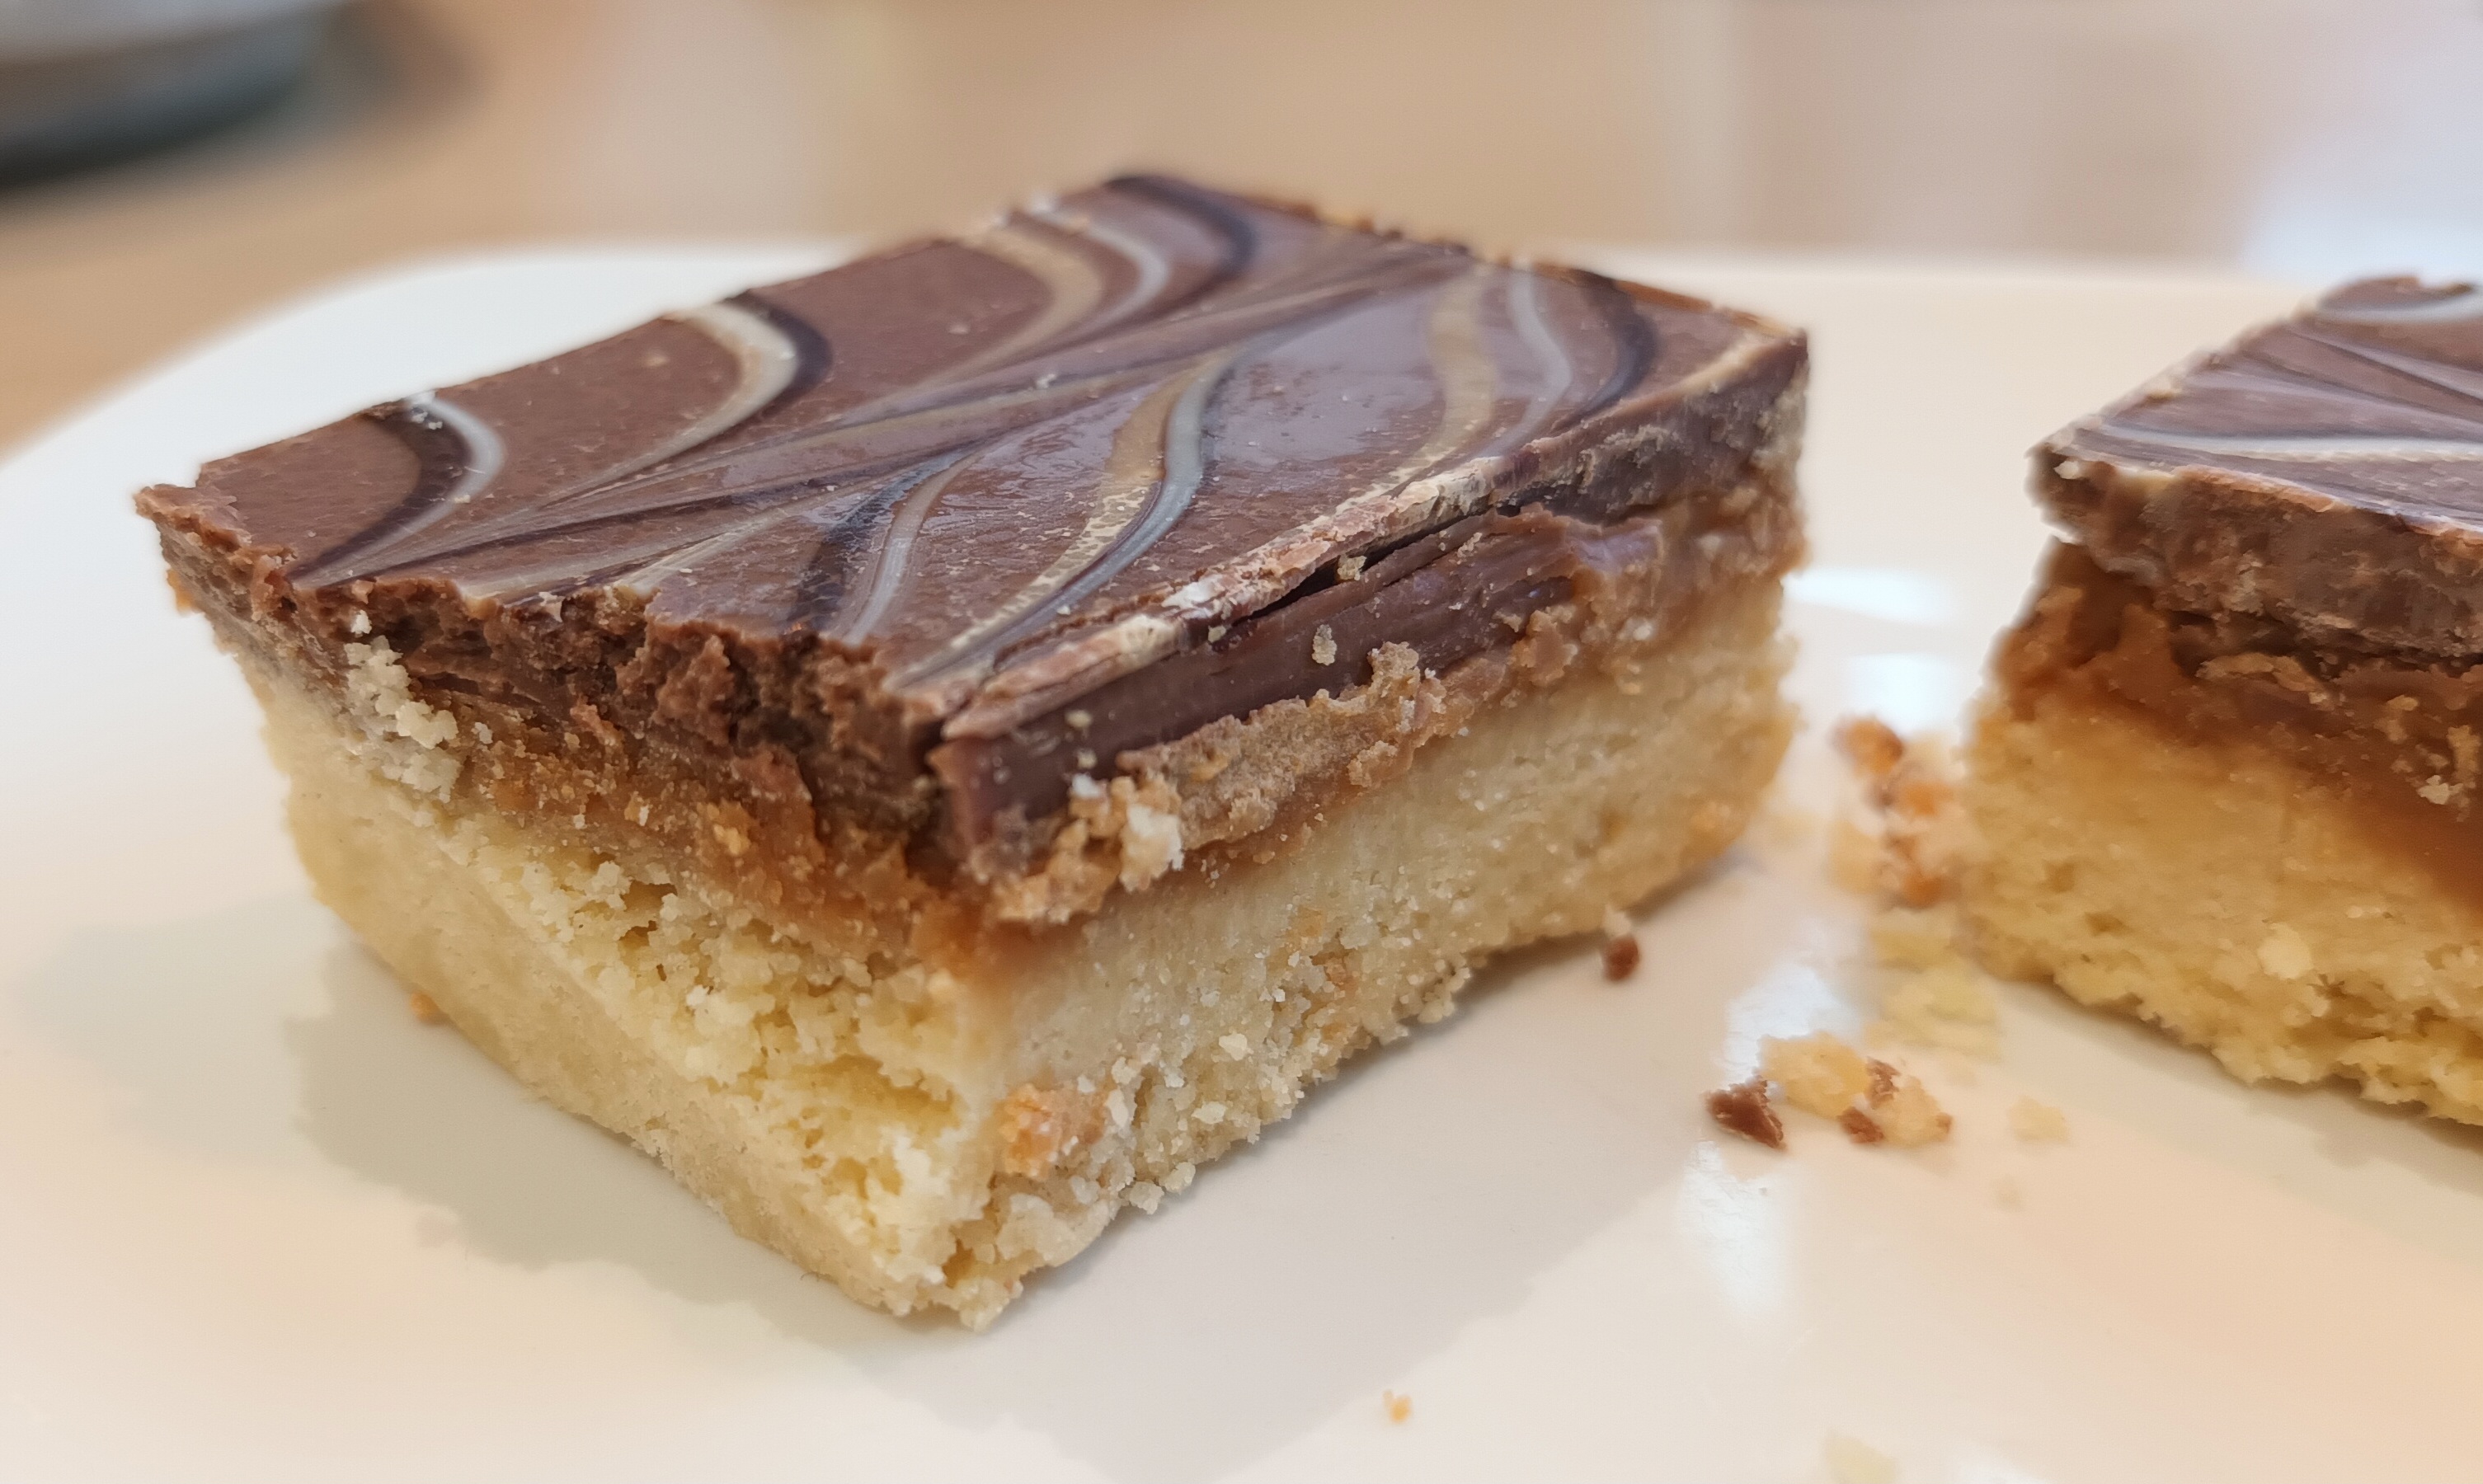 Photo of a slice of millionair's shortbread cut in two, showing layers of shortbread biscuit, caramel and chocolate.